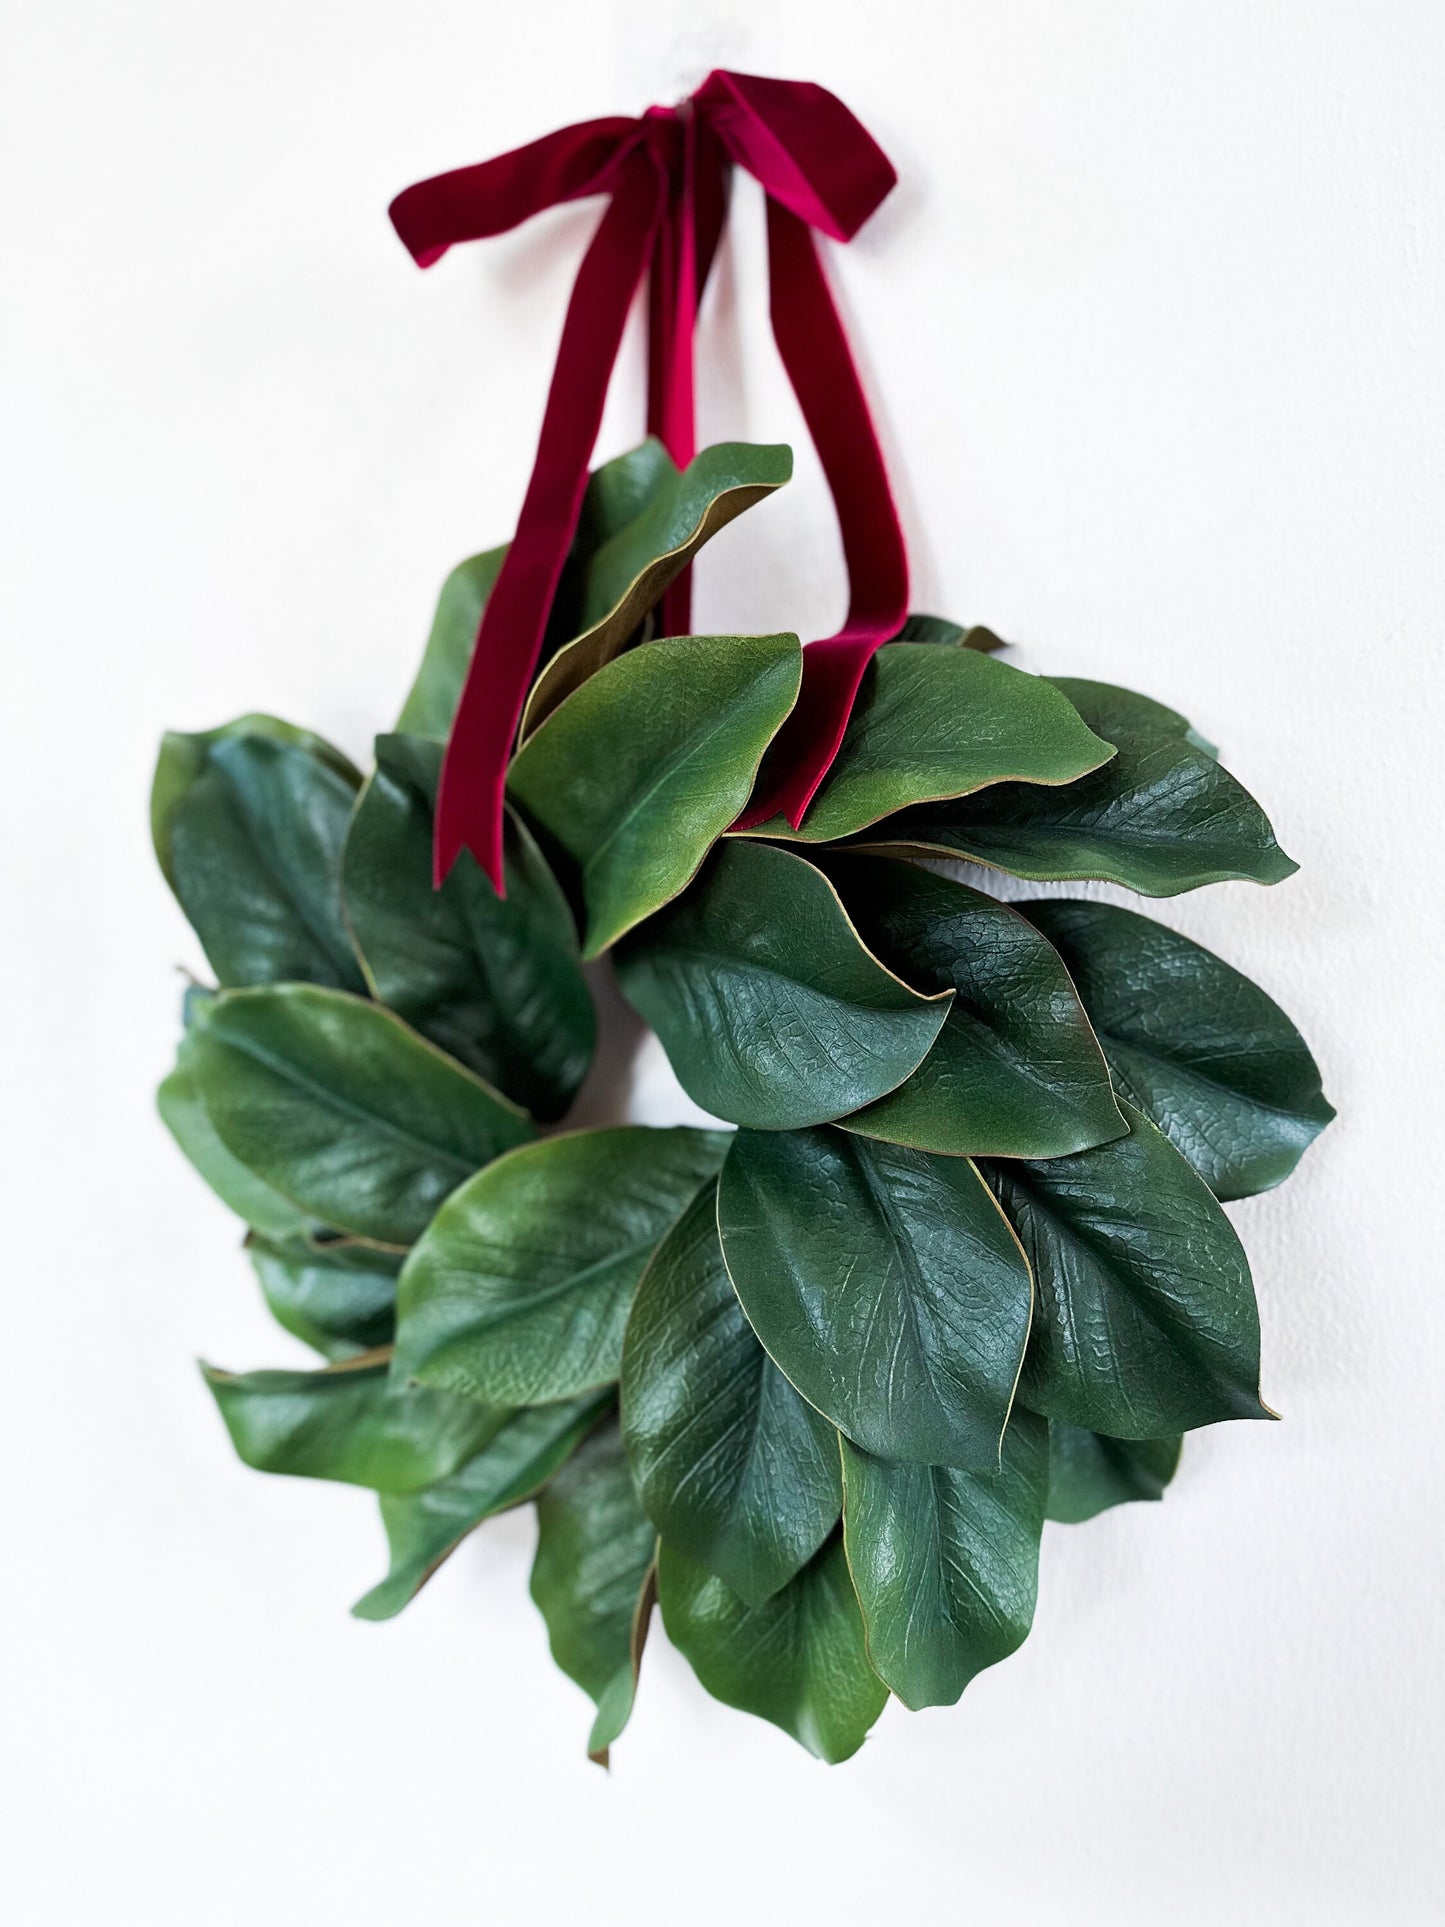 Mini Magnolia Wreath for Everyday or Christmas w/ Burgundy Velvet Bow, Faux Greenery Wreath for Everyday Gift, Small Wreath for Cabinets